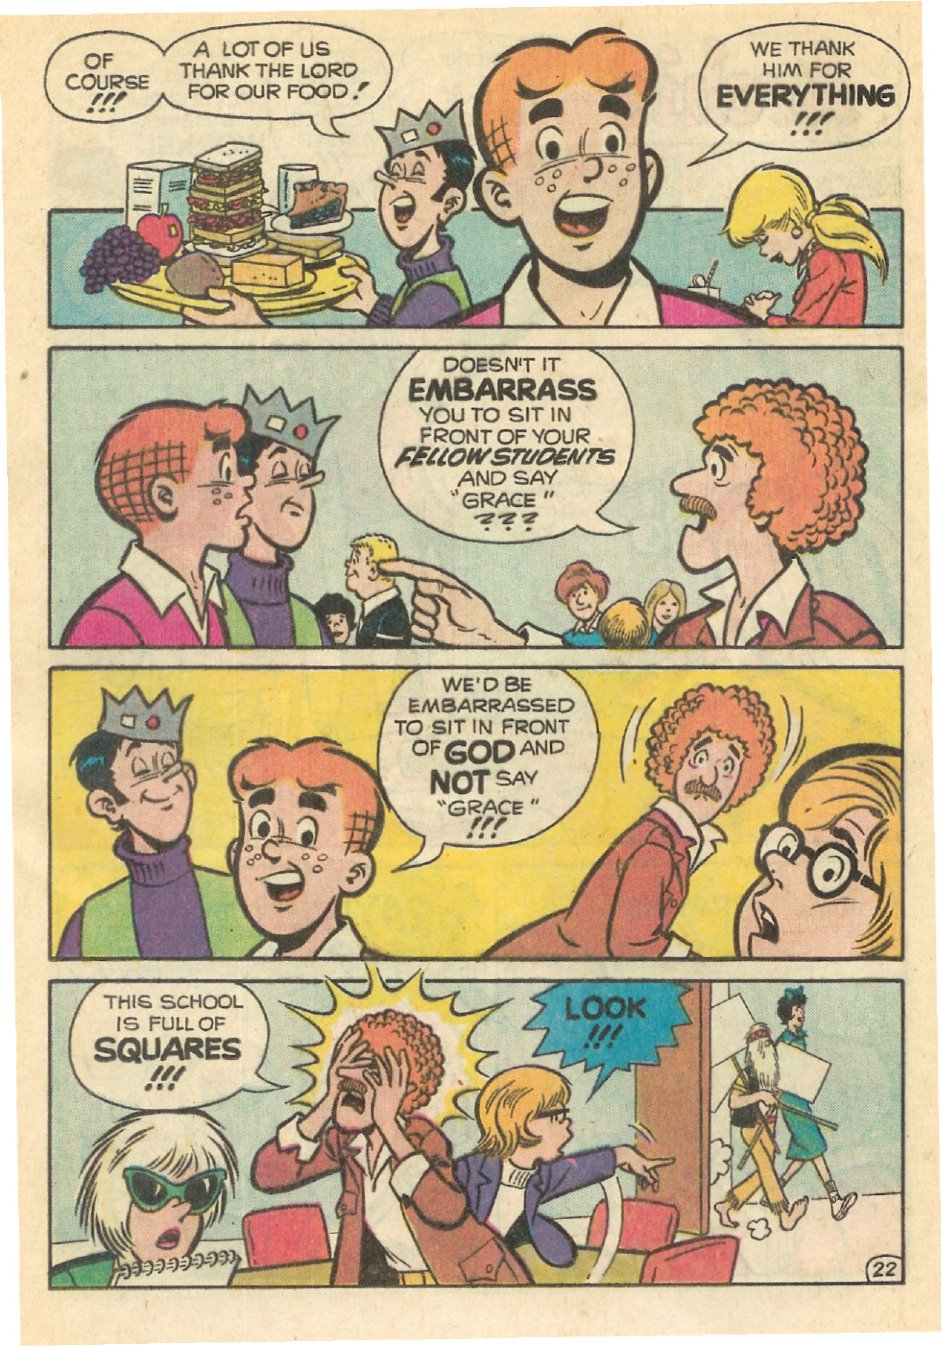 [Christian+Archie+EMBARASSED+NOT+TO+PRAY.jpg]